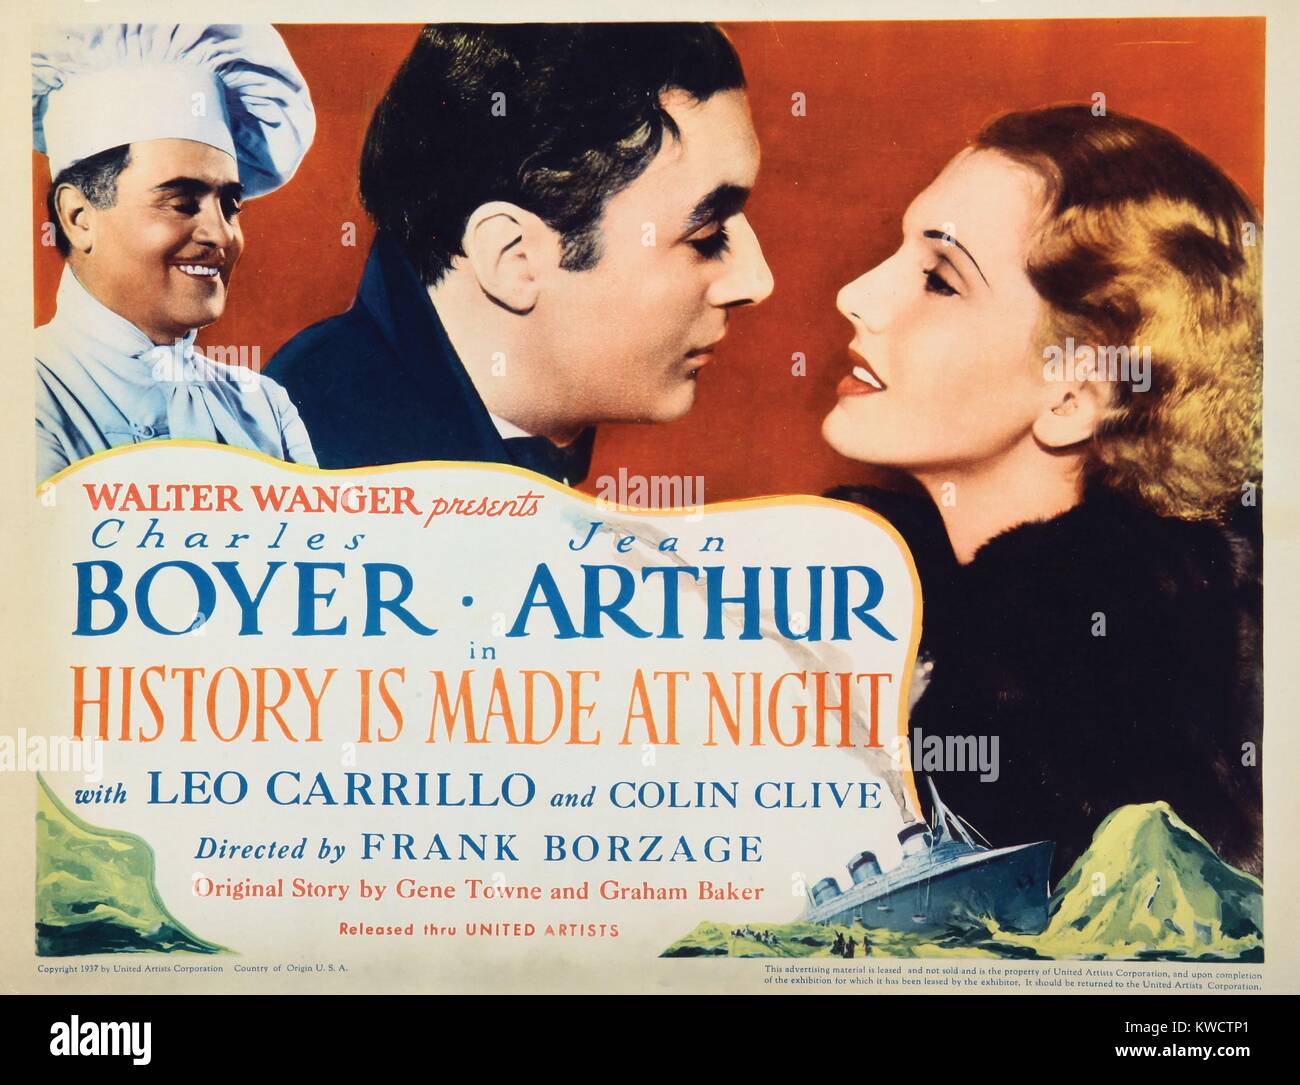 HISTORY IS MADE AT NIGHT, from left: Leo Carrillo, Charles Boyer, Jean Arthur, 1937. Stock Photo